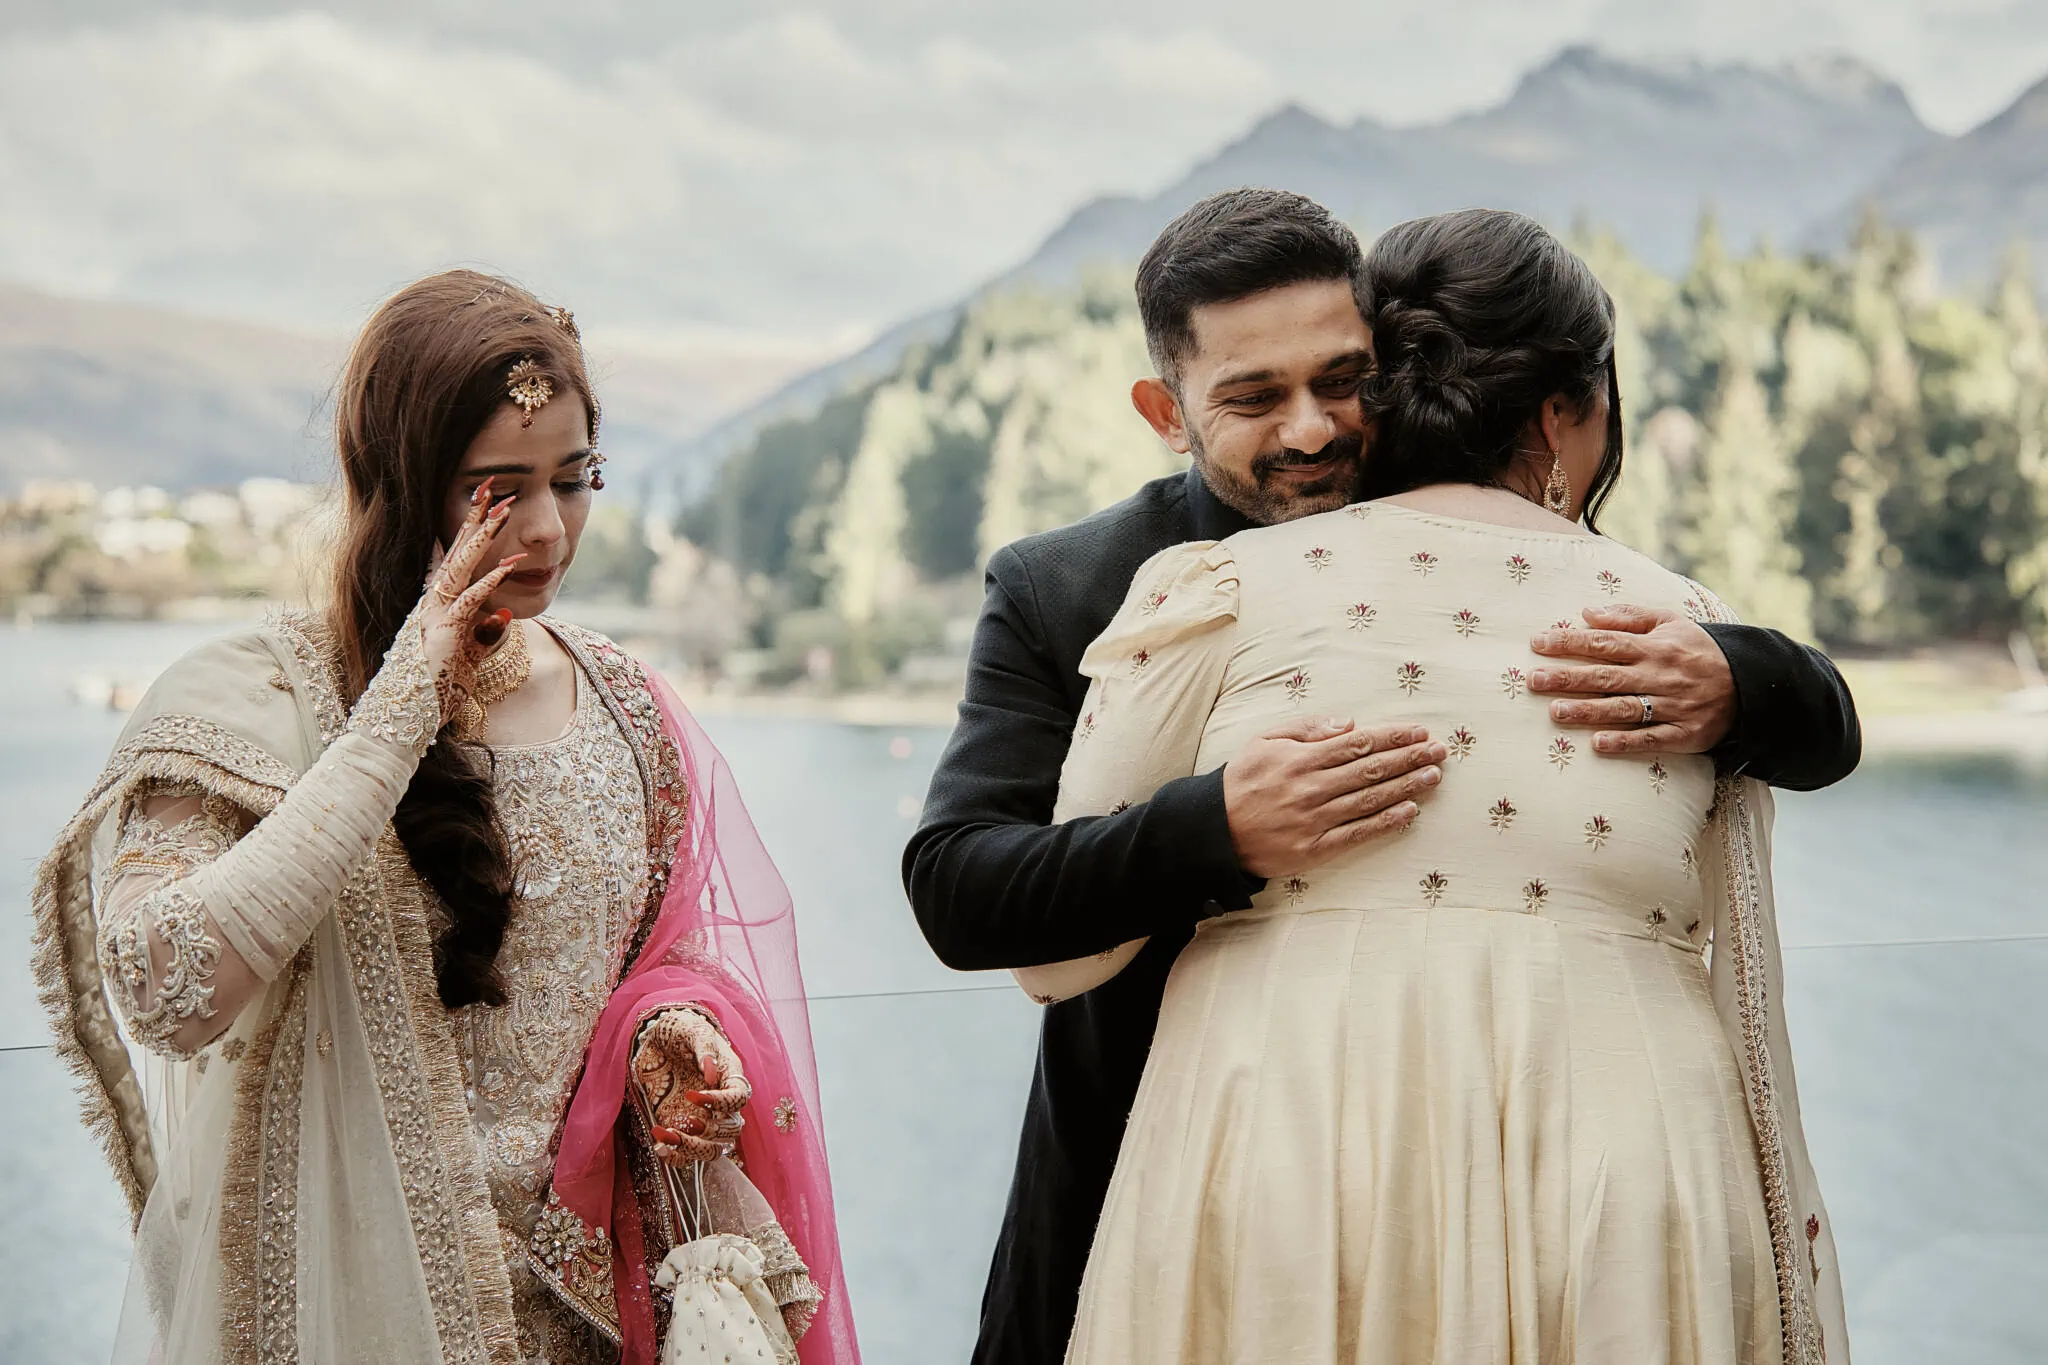 Queenstown New Zealand Elopement Wedding Photographer - Wasim and Yumn's beautiful Islamic wedding - a bride and groom hugging beside a lake in Queenstown.